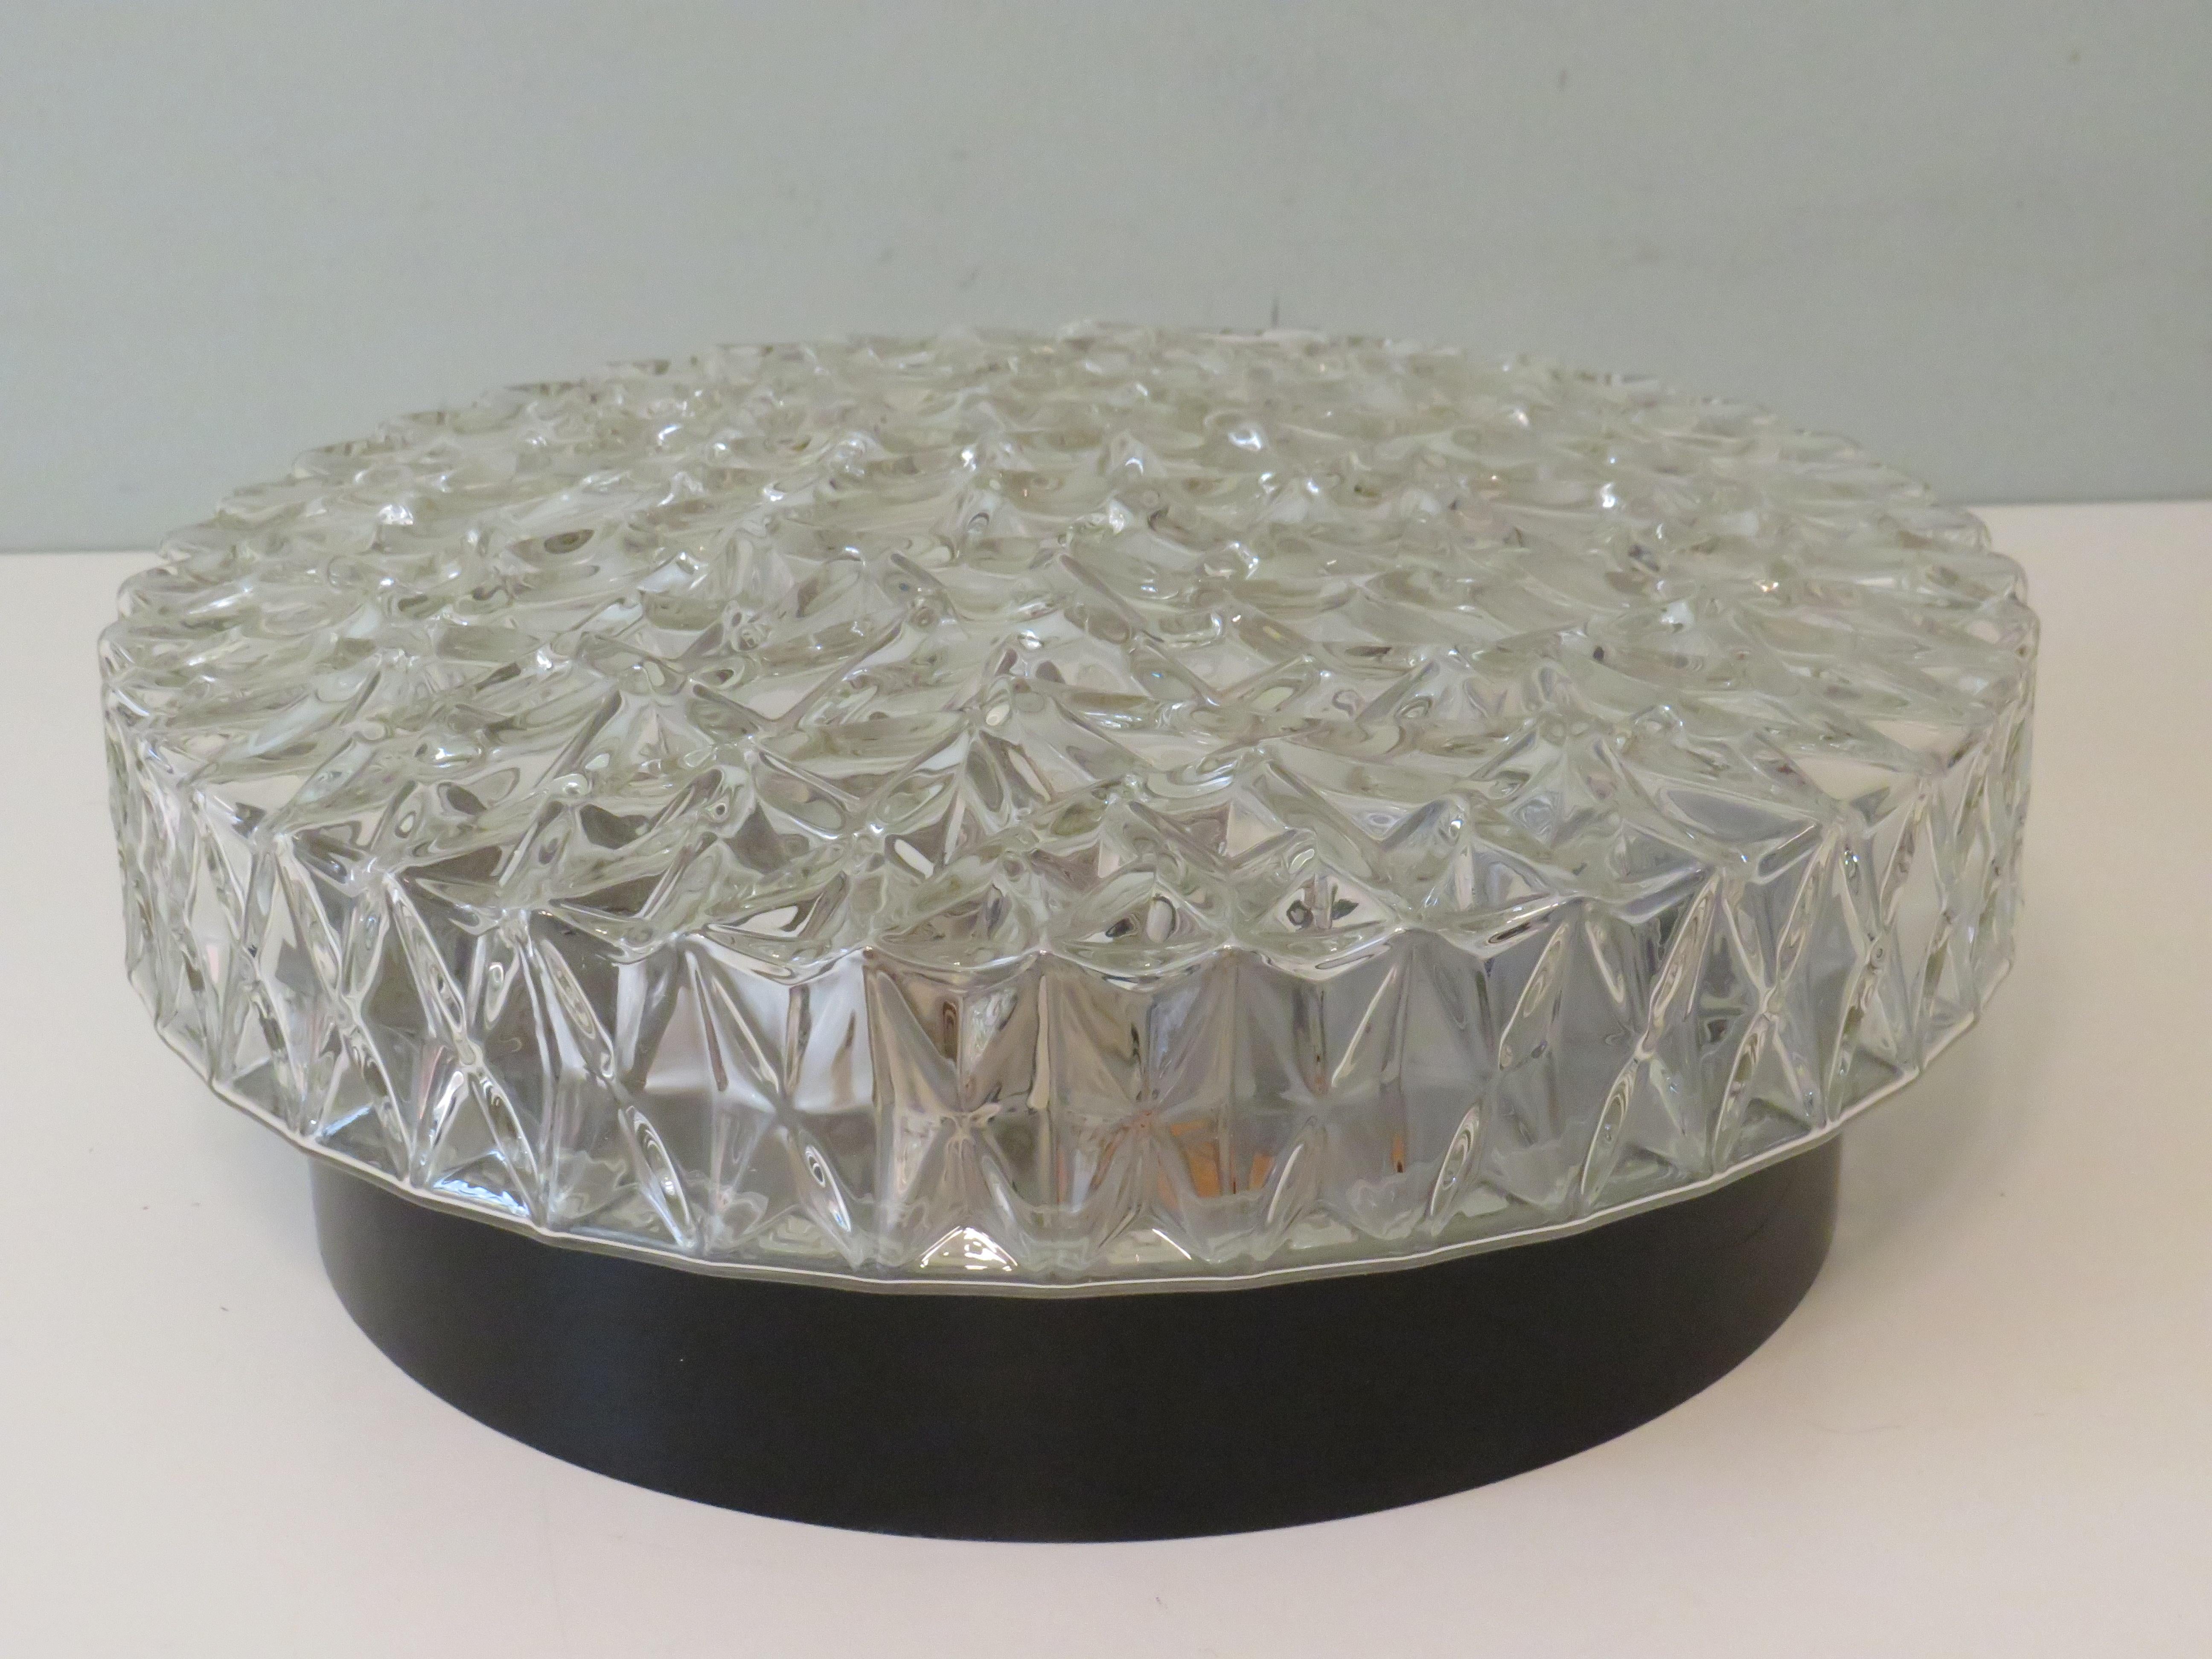 Round heavy ceiling lamp with black metal ceiling or wall mounting plate and 2 porcelain sockets E 27.
The glass dome has geometric motifs that create a beautiful light effect.
The diameter of the lamp is 30 cm and the height is 11 cm.
The lamp